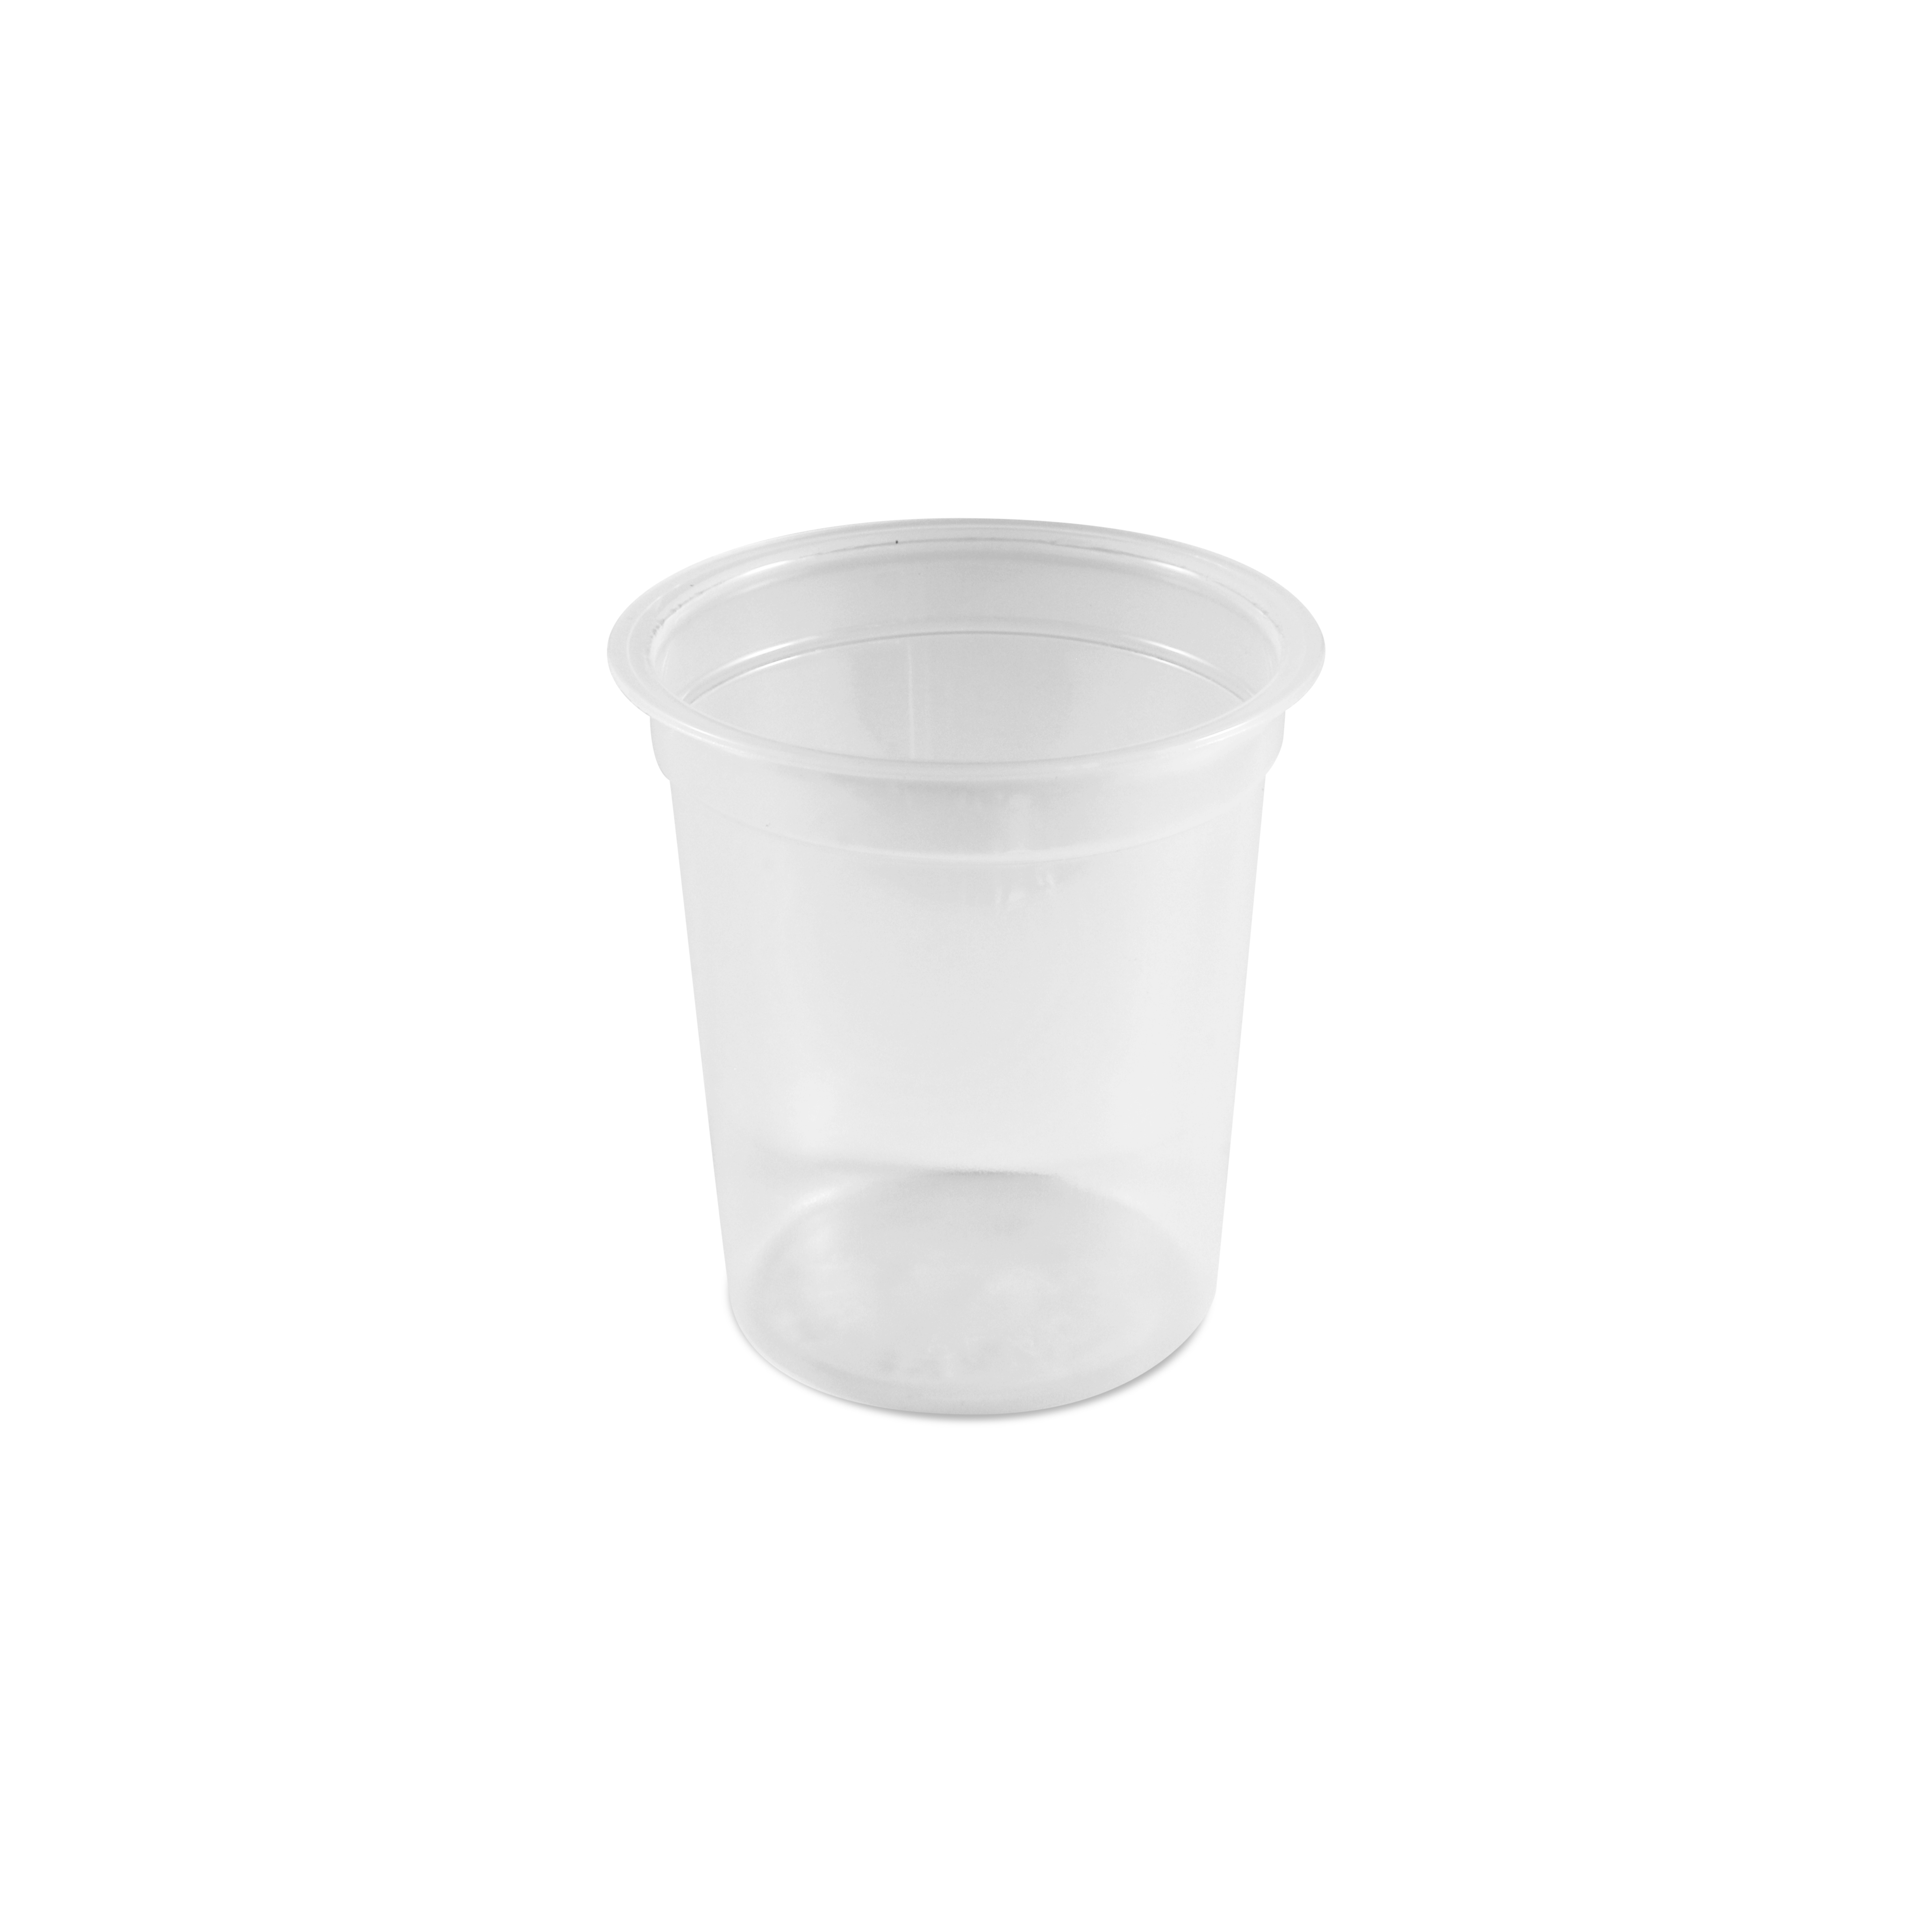 https://www.berryglobal.com/-/media/Berry/Images/Products/Berry-Global/150ml-707mm-Dessert-Cup-PP-13662304/cup_150ml_clear_pp_13662304.ashx